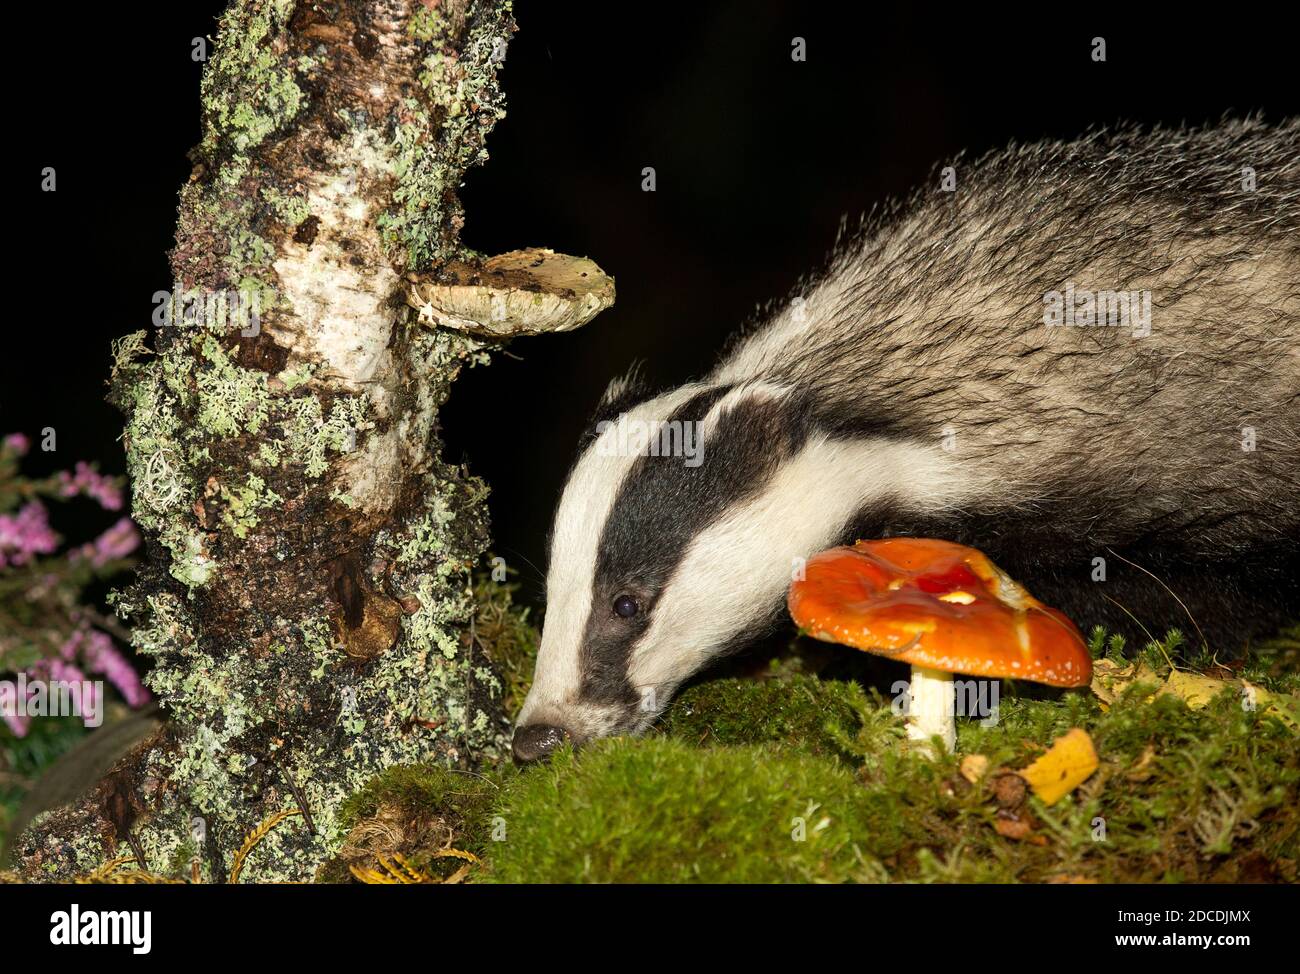 Badger, Scientific name: Meles Meles.  Close up of a wild, native, Eurasian badger foraging in natural woodland habitat with Fly Agaric mushroom. Stock Photo